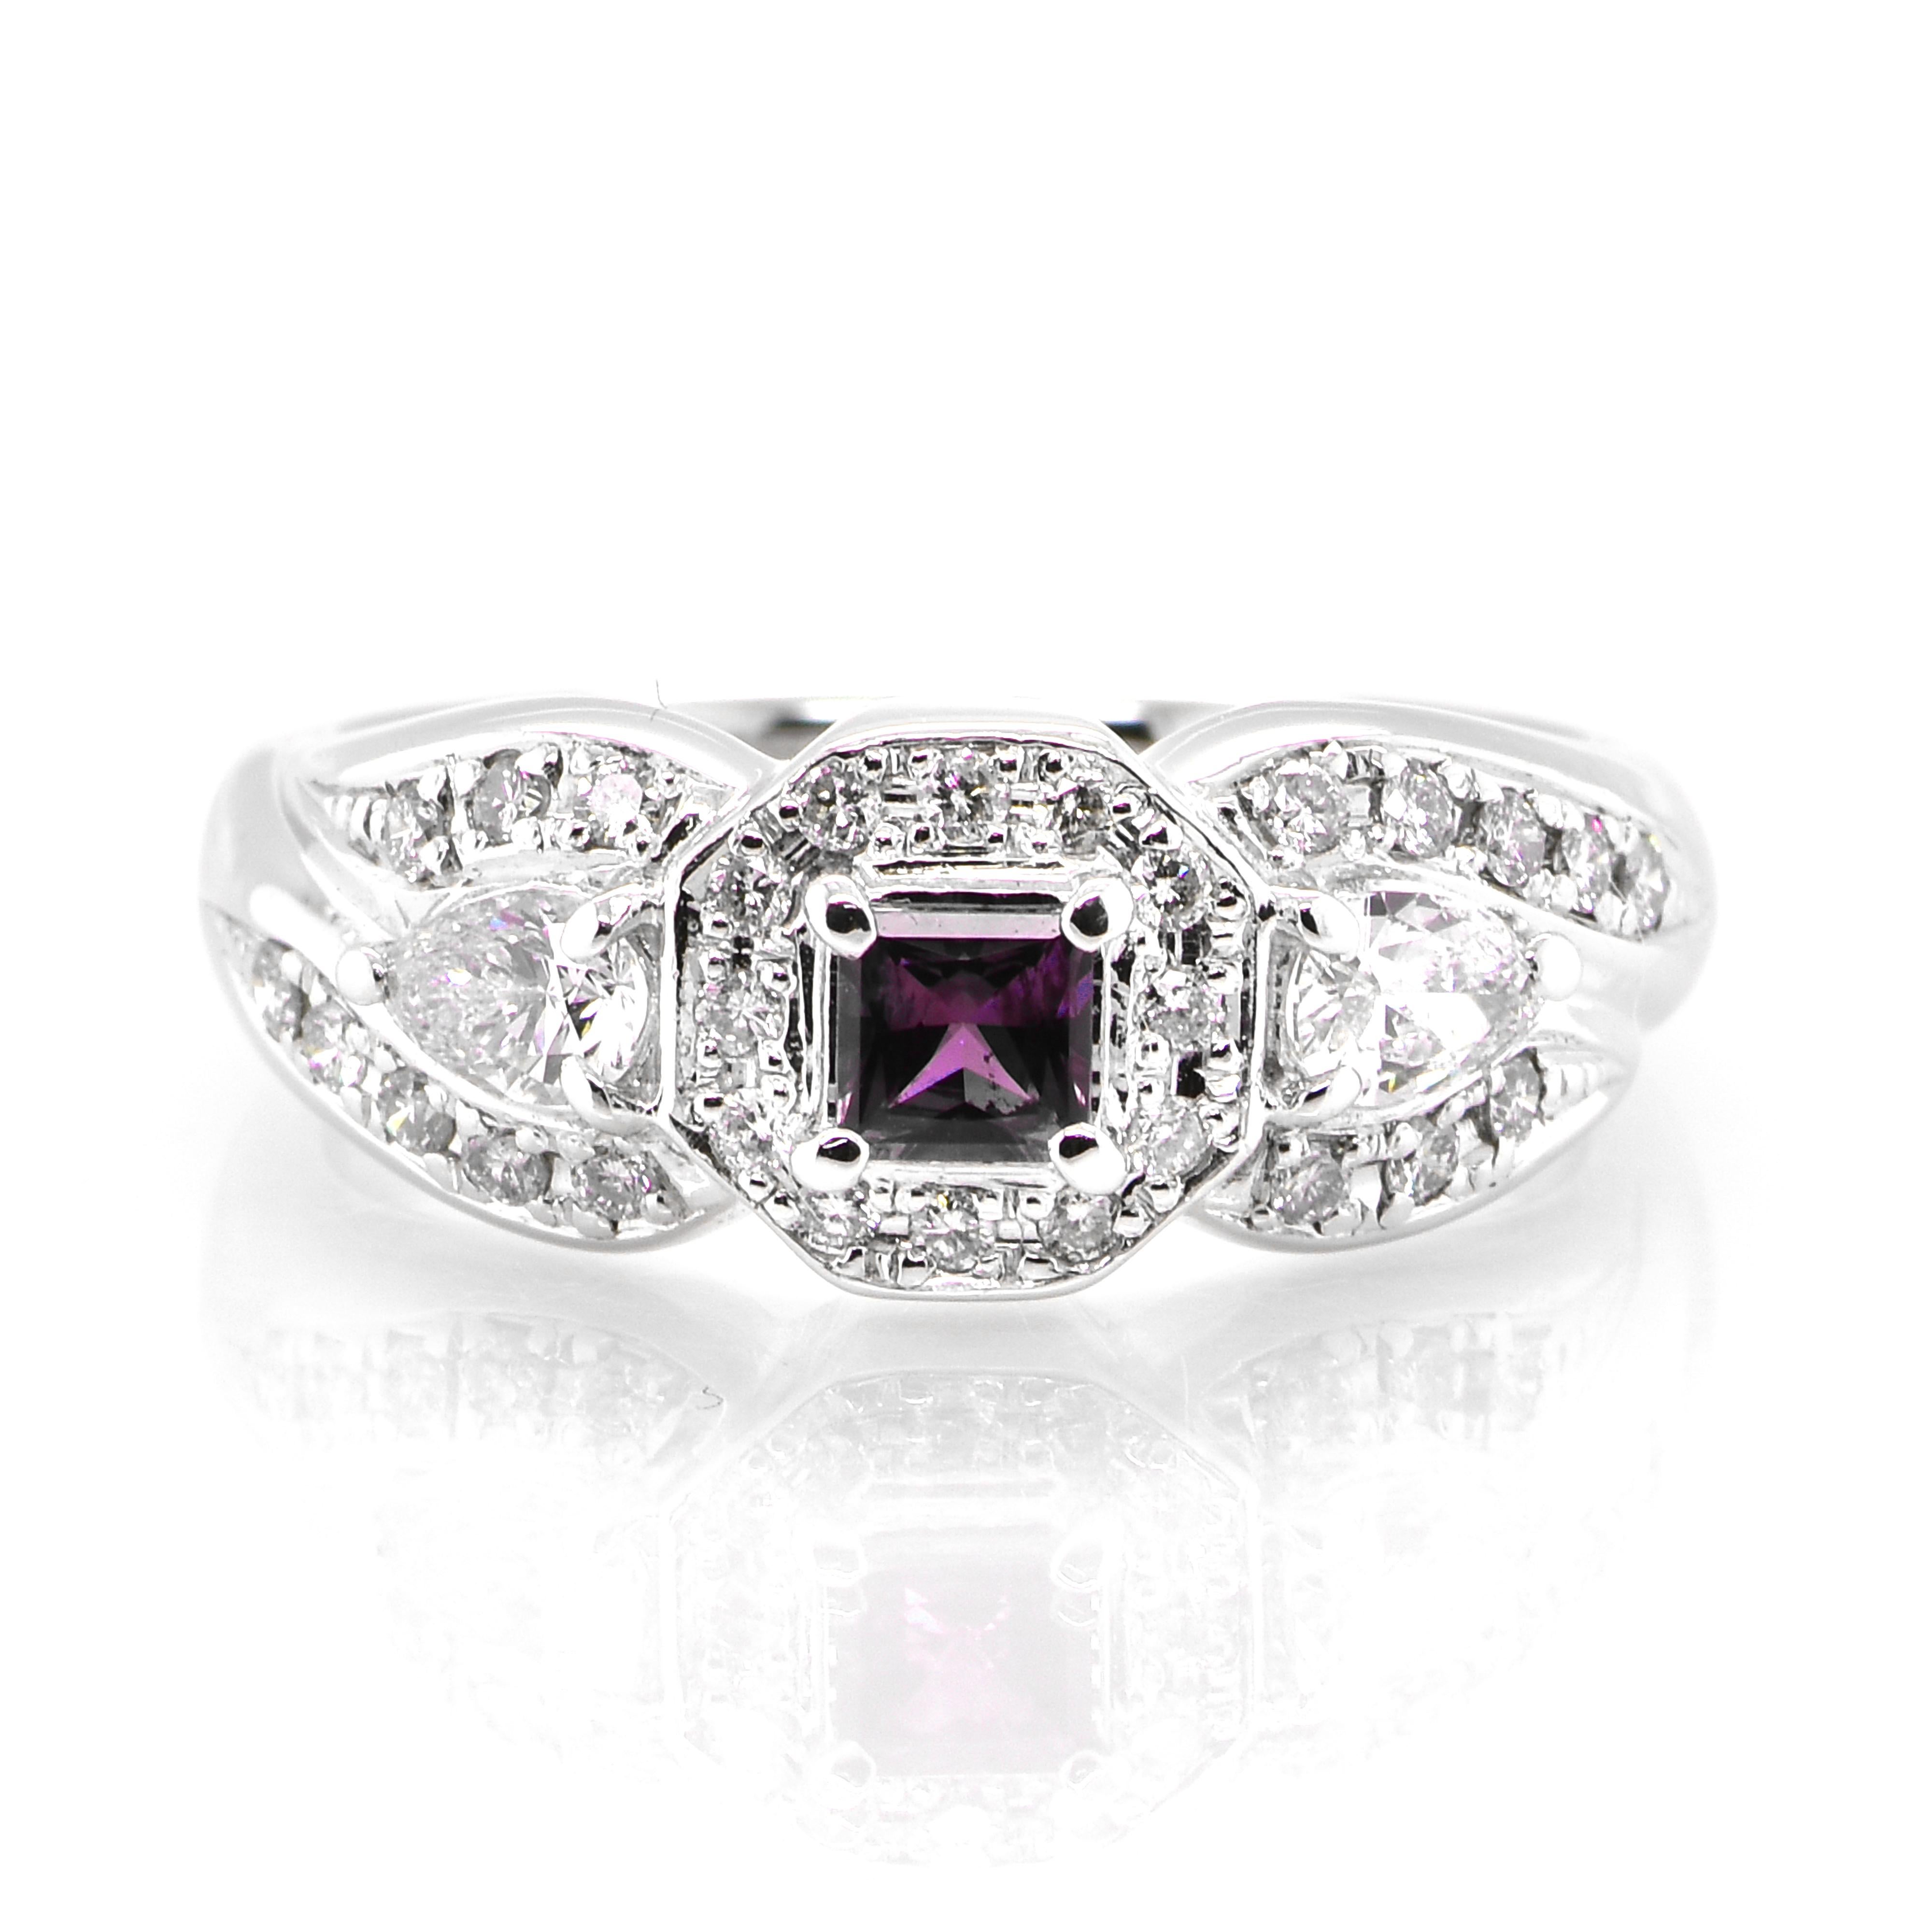 A gorgeous ring featuring 0.21 Carat, Natural Alexandrite and 0.52 Carats of Diamond Accents set in Platinum. Alexandrites produce a natural color-change phenomenon as they exhibit a Bluish Green Color under Fluorescent Light whereas a Purplish Red